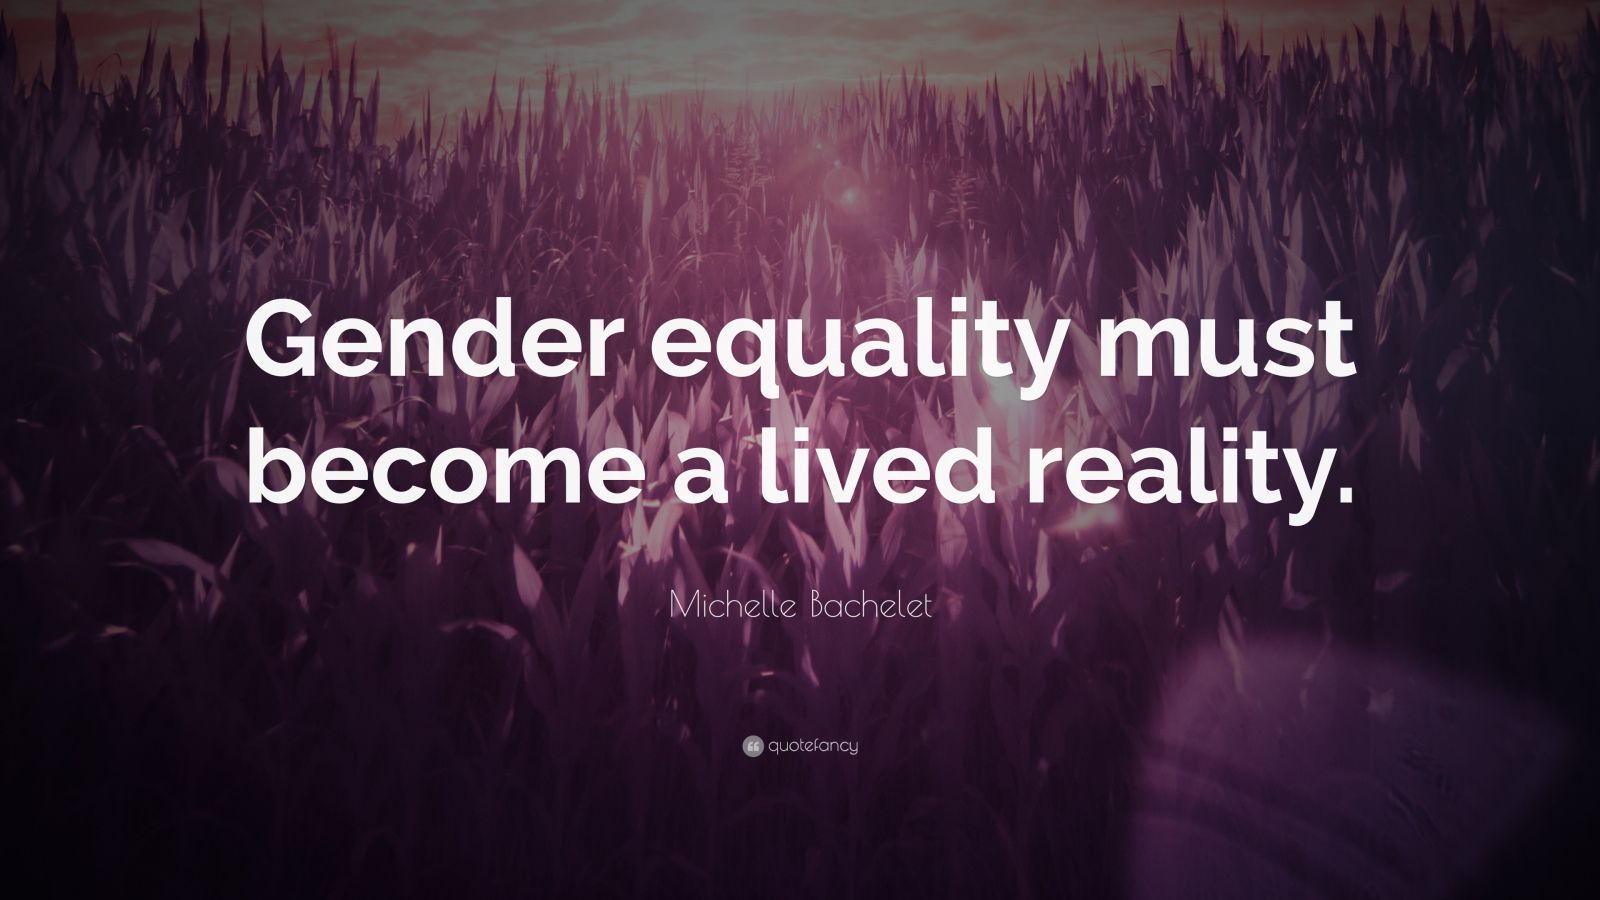 Michelle Bachelet Quote: “Gender equality must become a lived reality.”